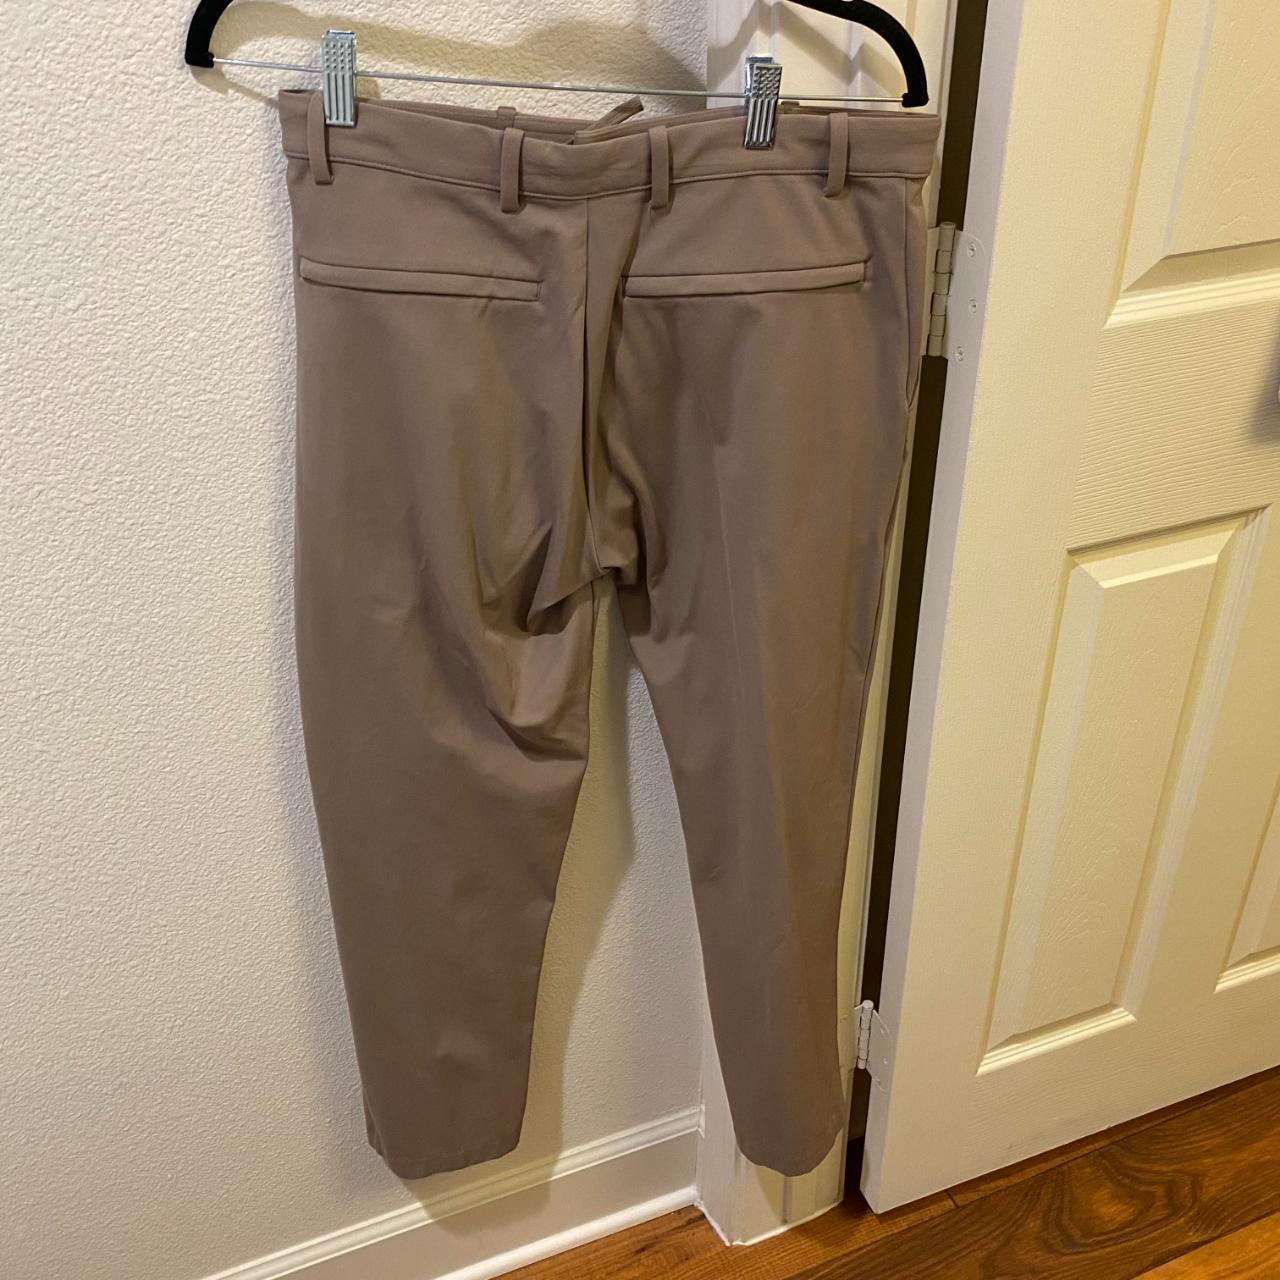 UNIQLO Brown Pants Size Medium Purchased while in Japan - Depop